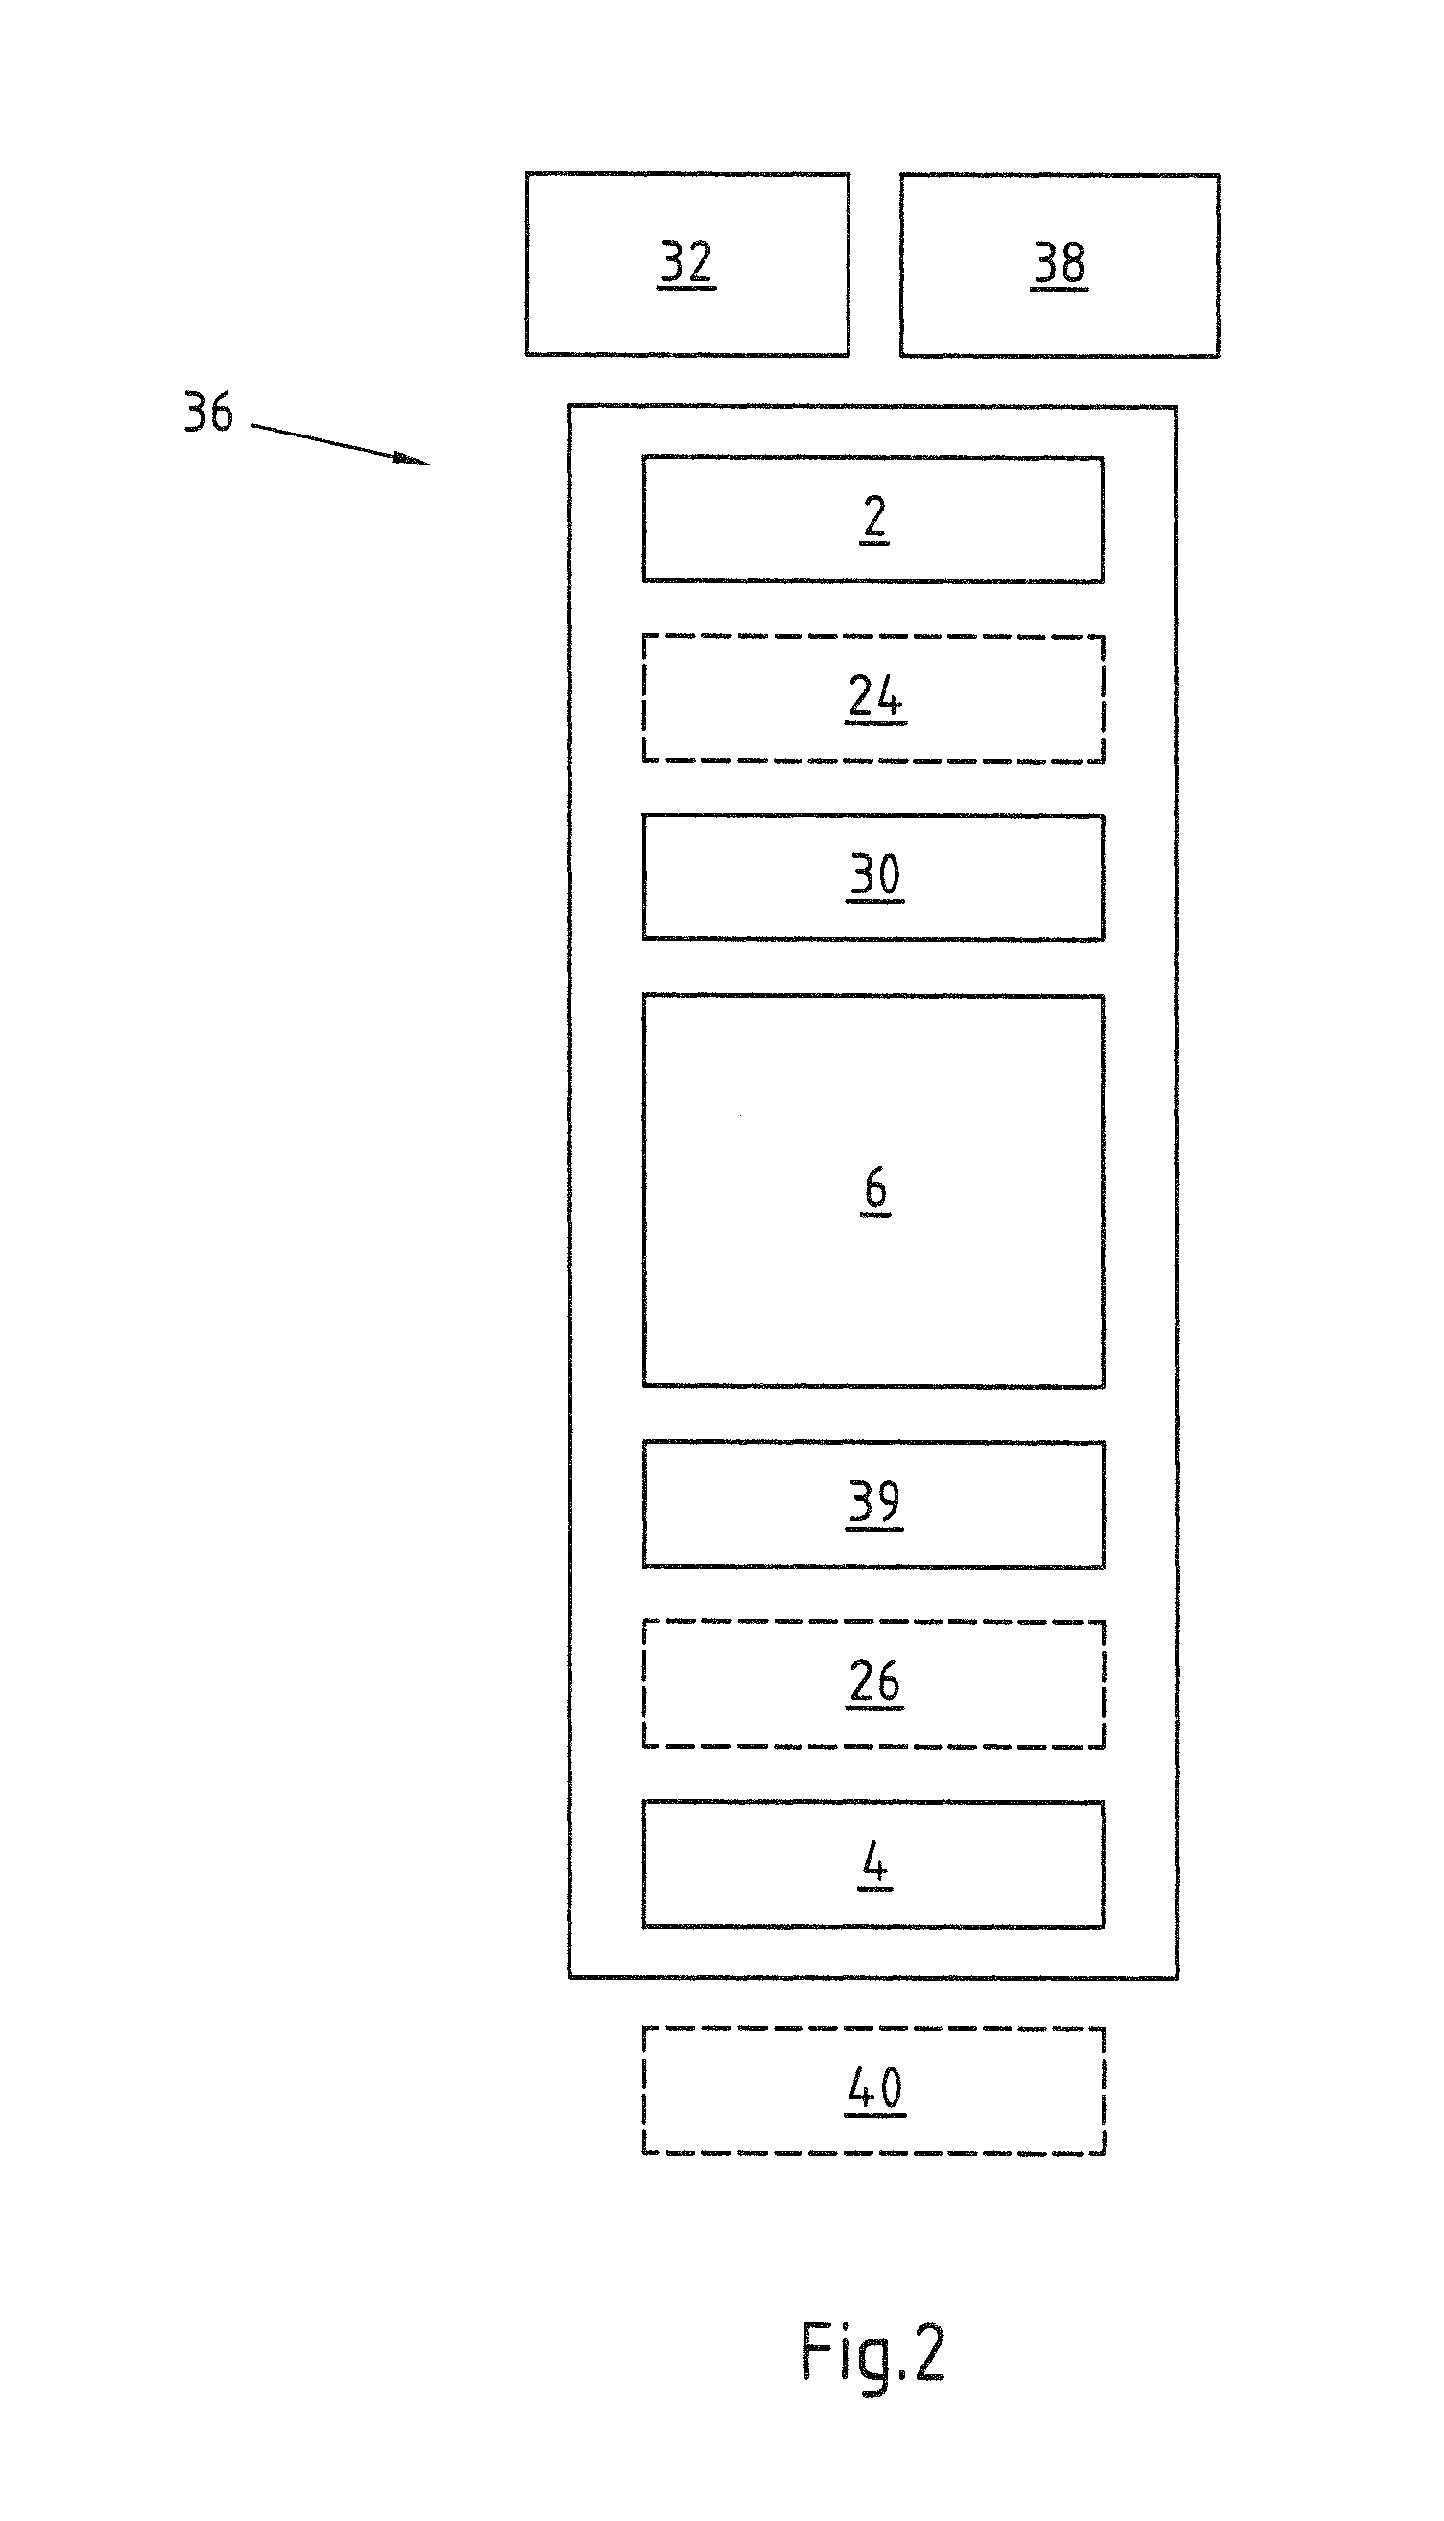 Switchgear Cabinet Arrangement of a Device for Producing Electric Energy